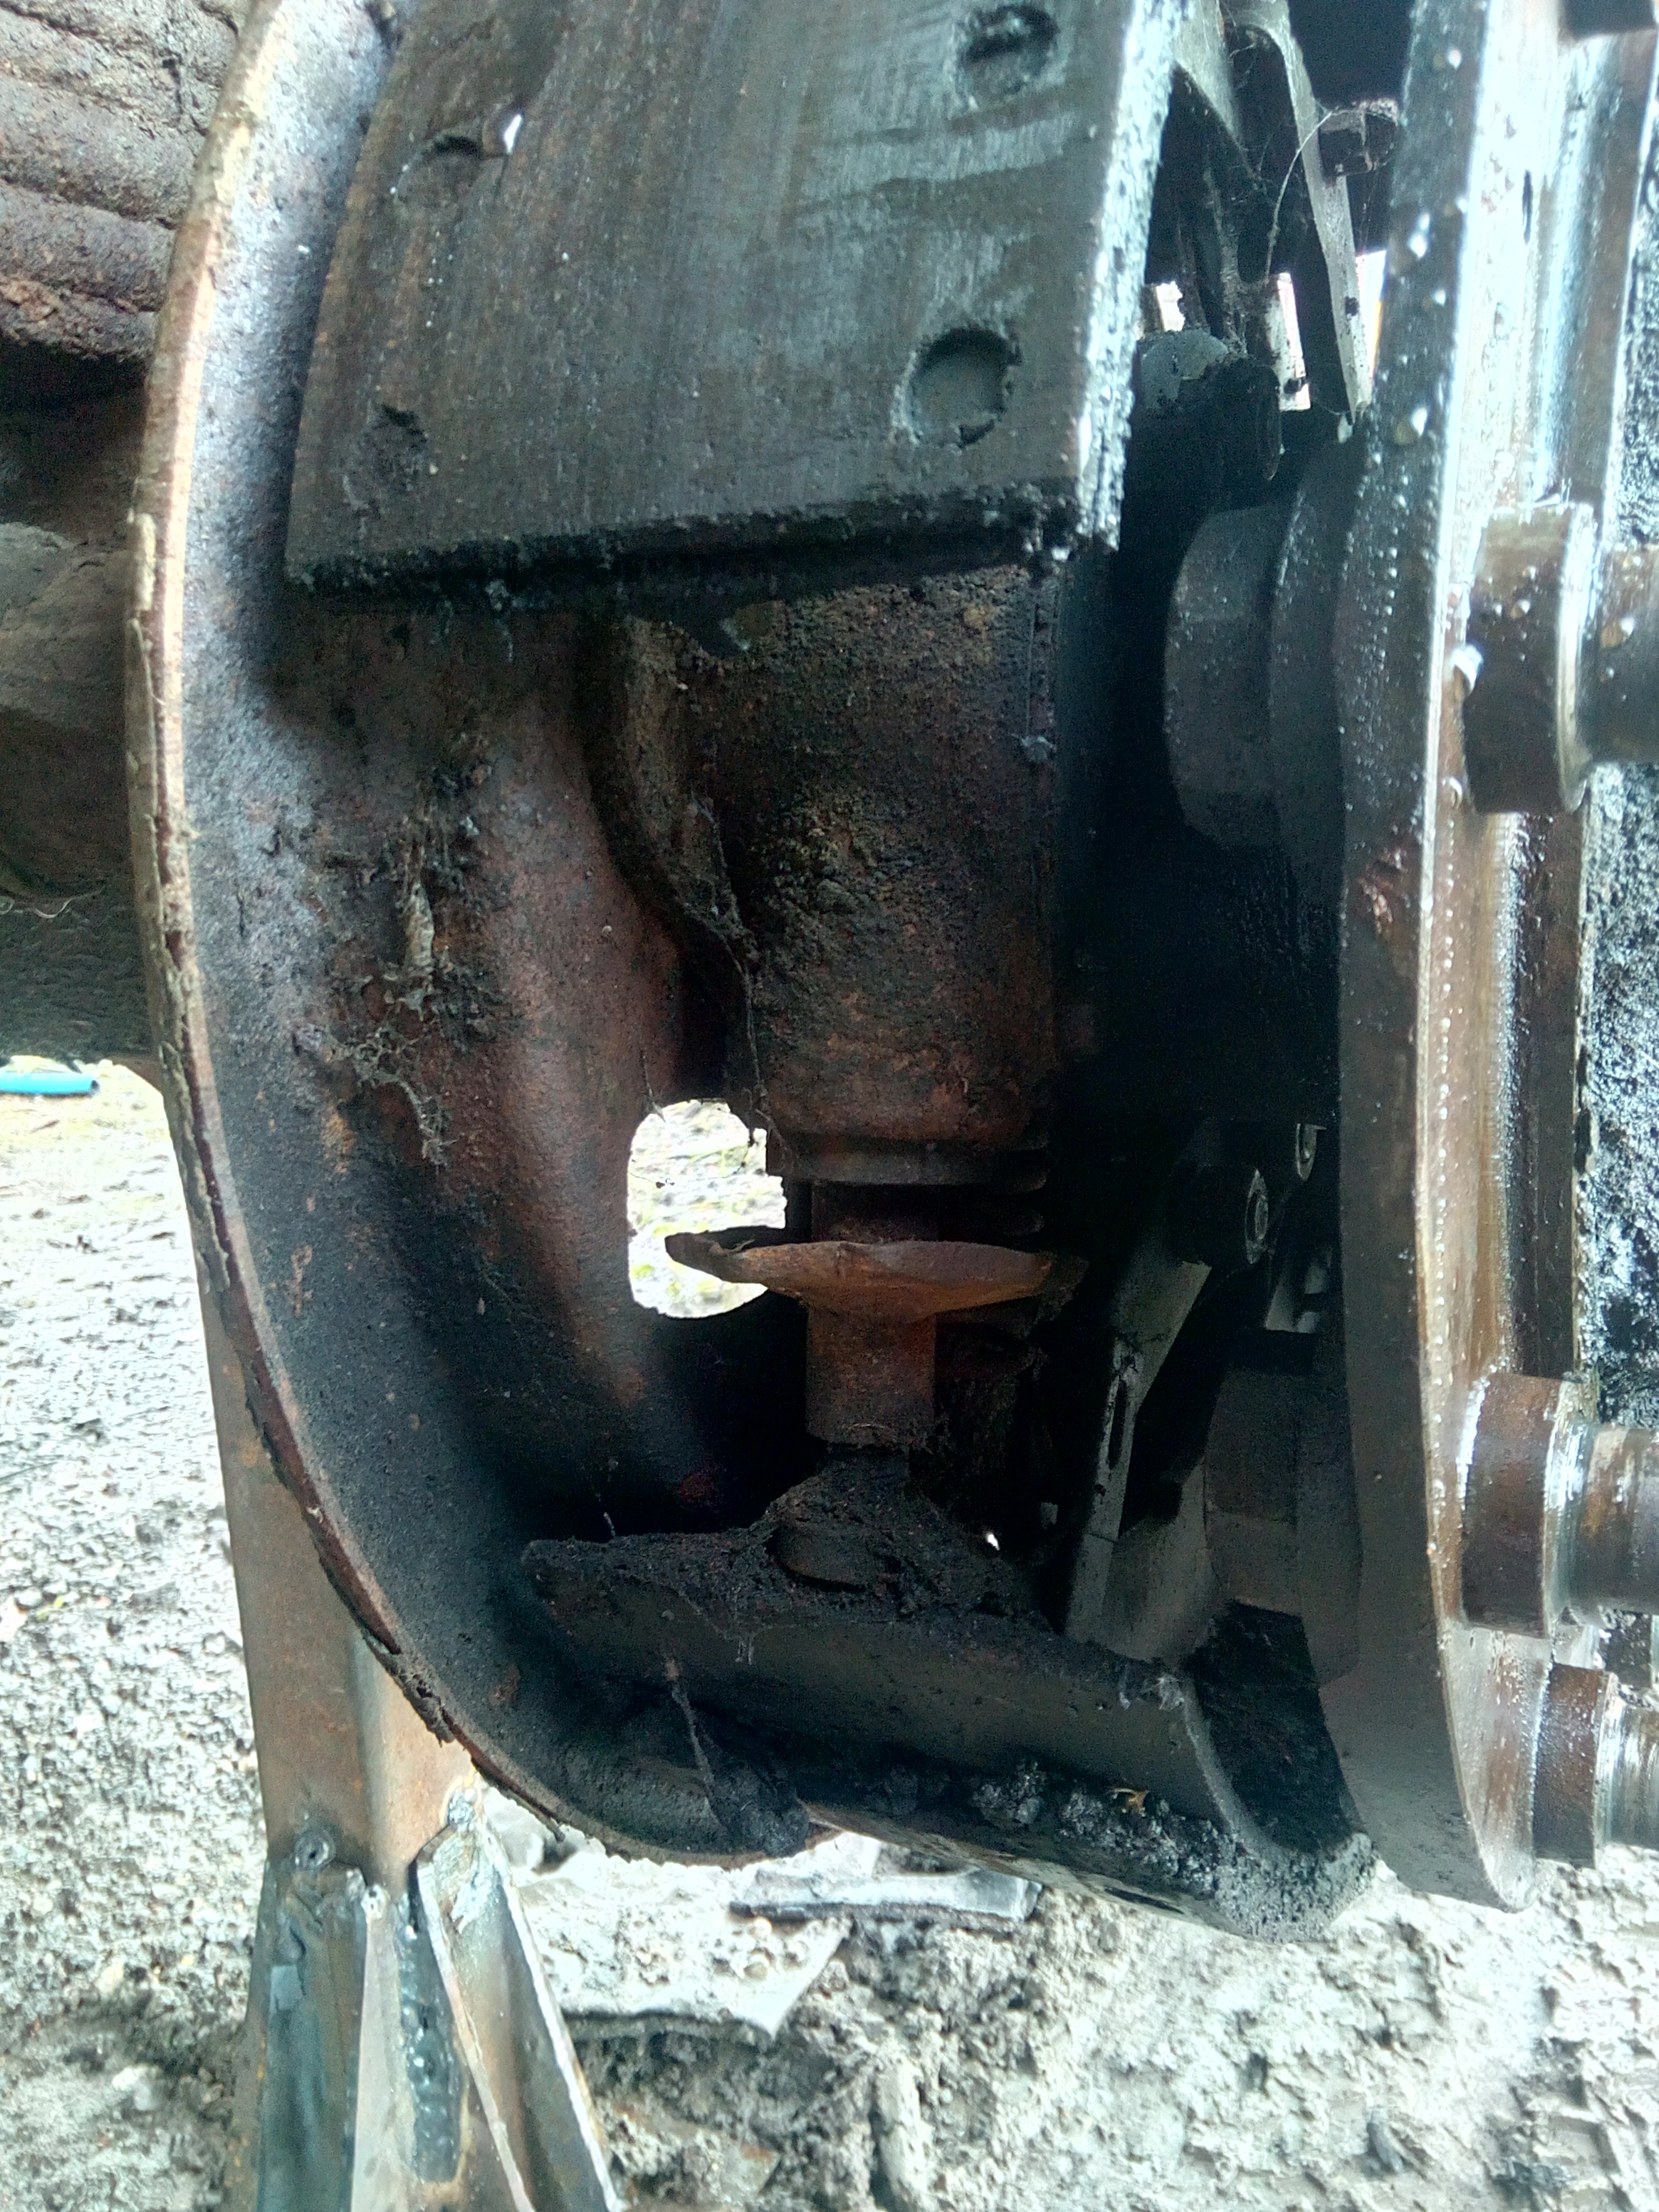 A close-up photograph of the brake mechanism, showing a large
buildup of grease, dirt, brake-dust, and cobwebs.